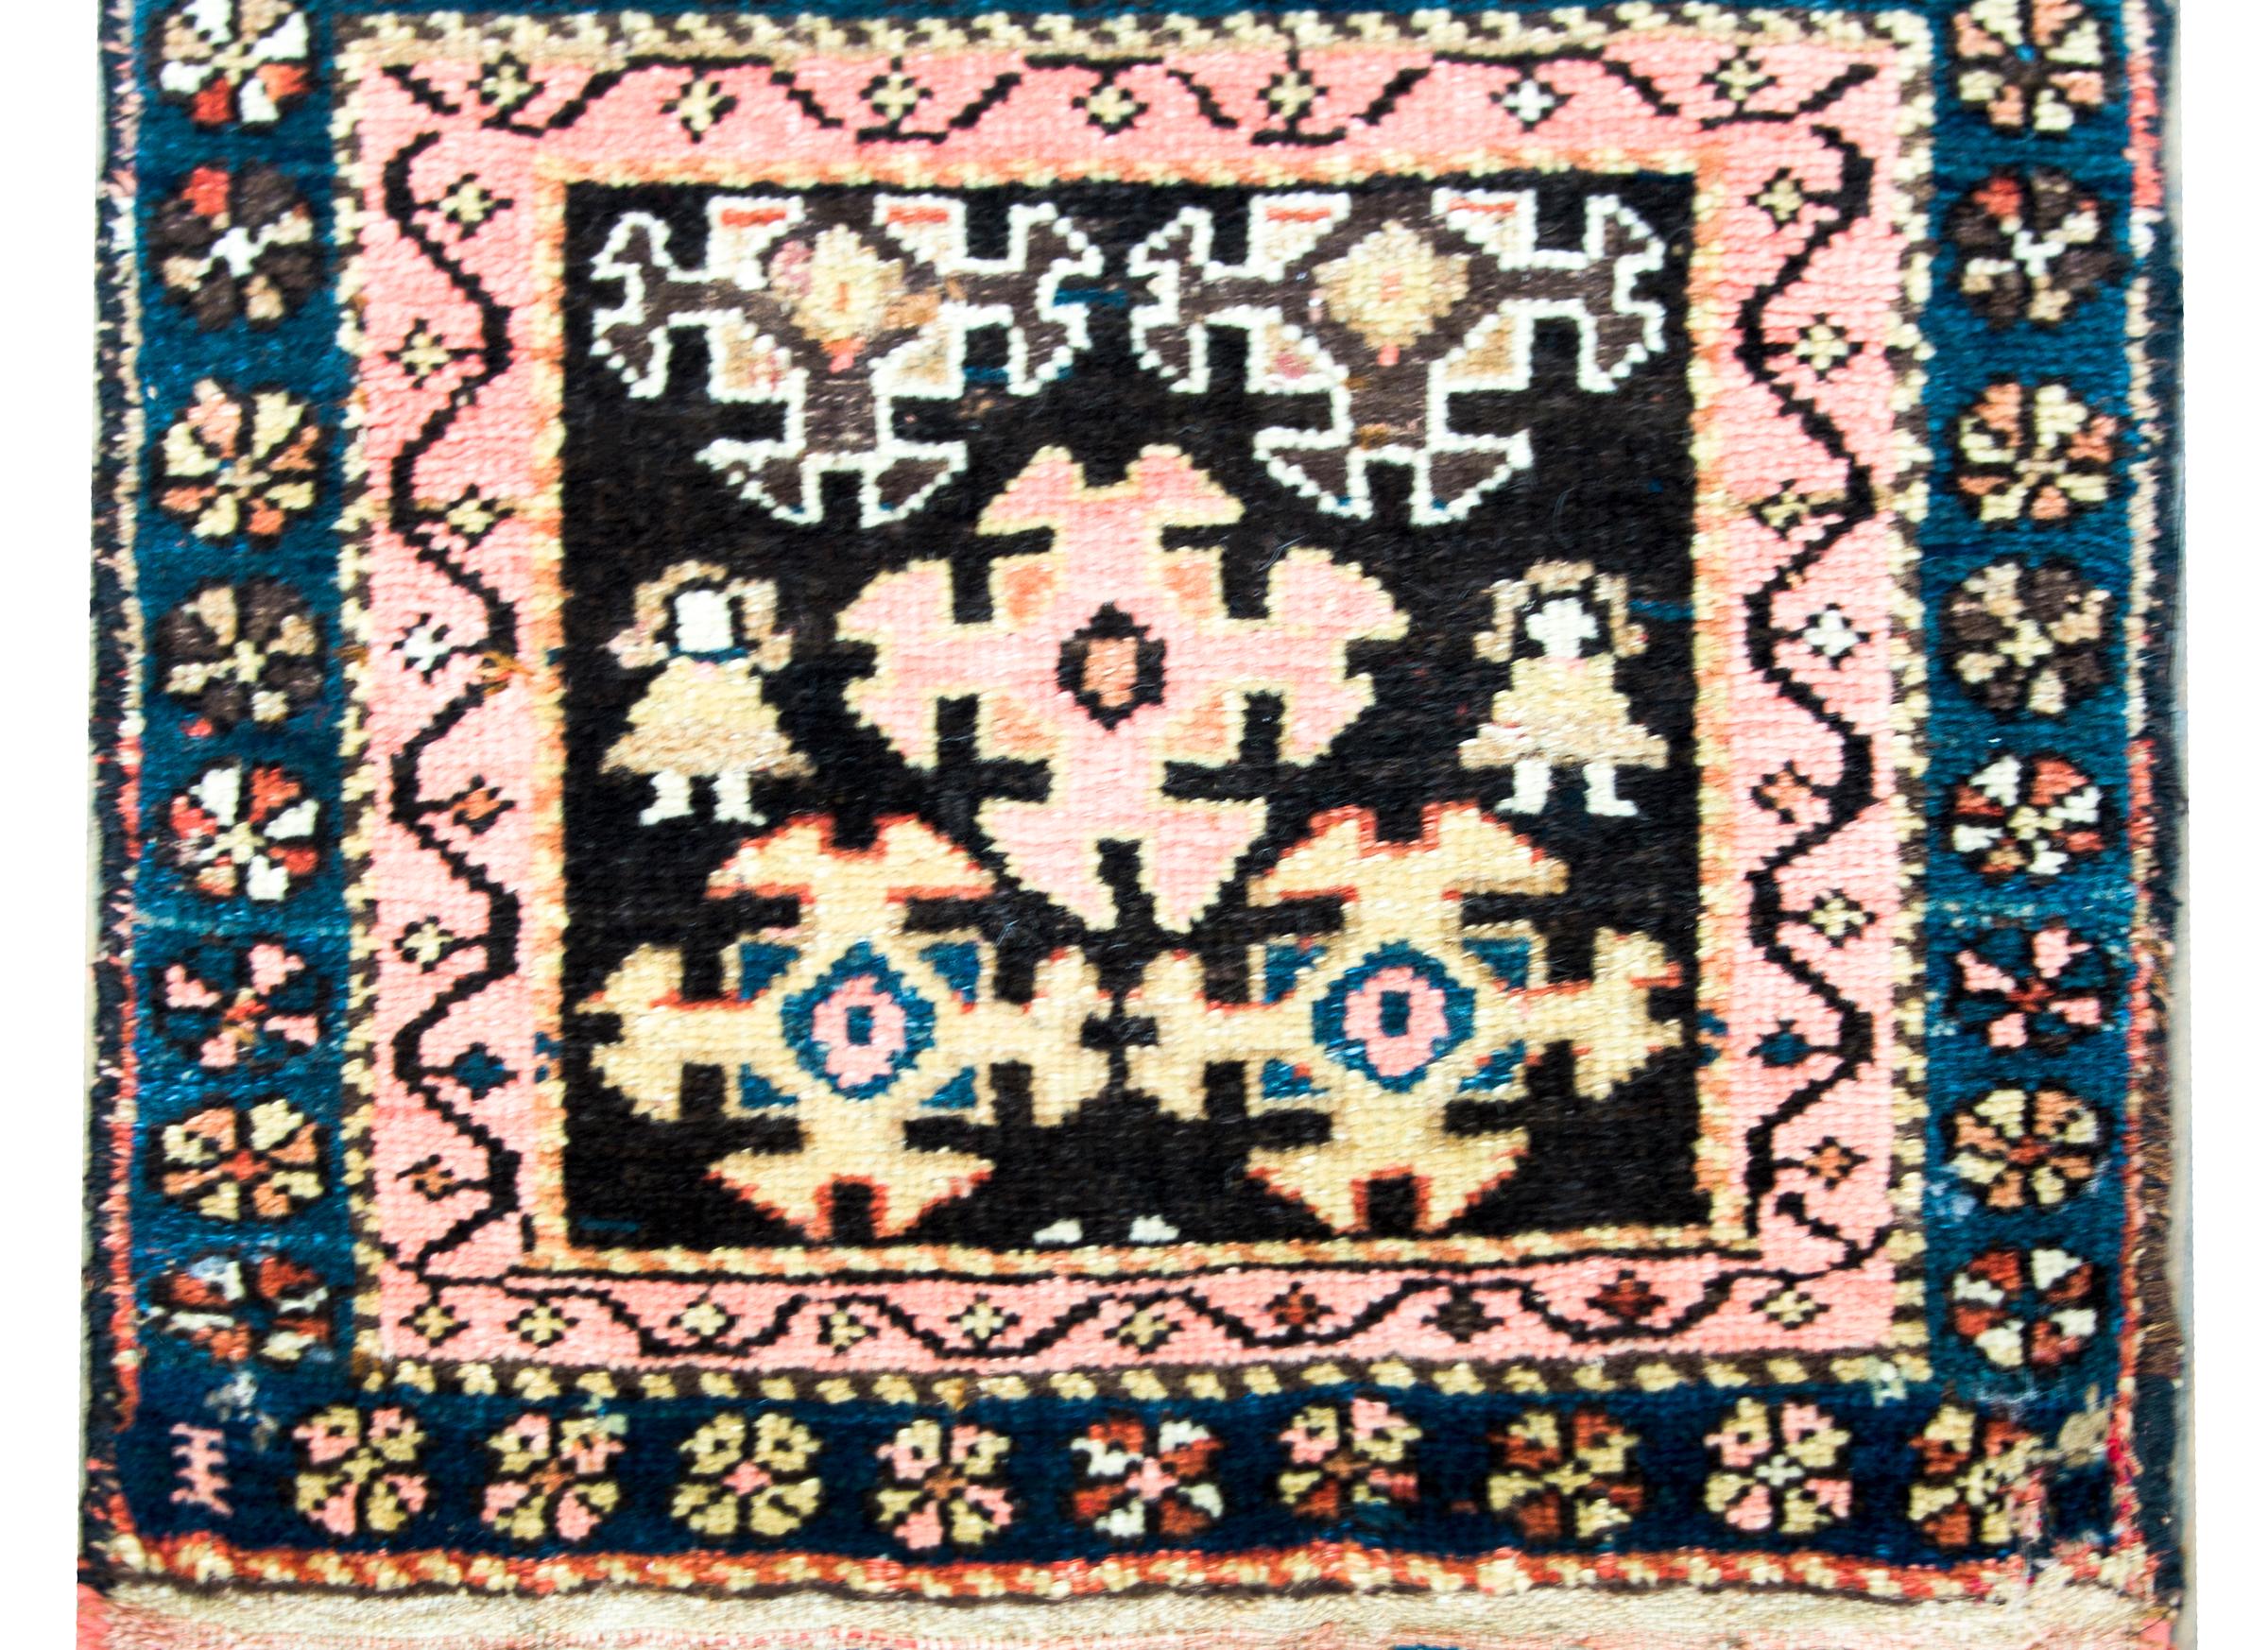 A striking early 20th century Kurdish rug with several stylized flowers woven in pink, yellow, and indigo, set against a black background, and surrounded by a border containing two stylized flor patterned stripes woven in similar colors as the field.